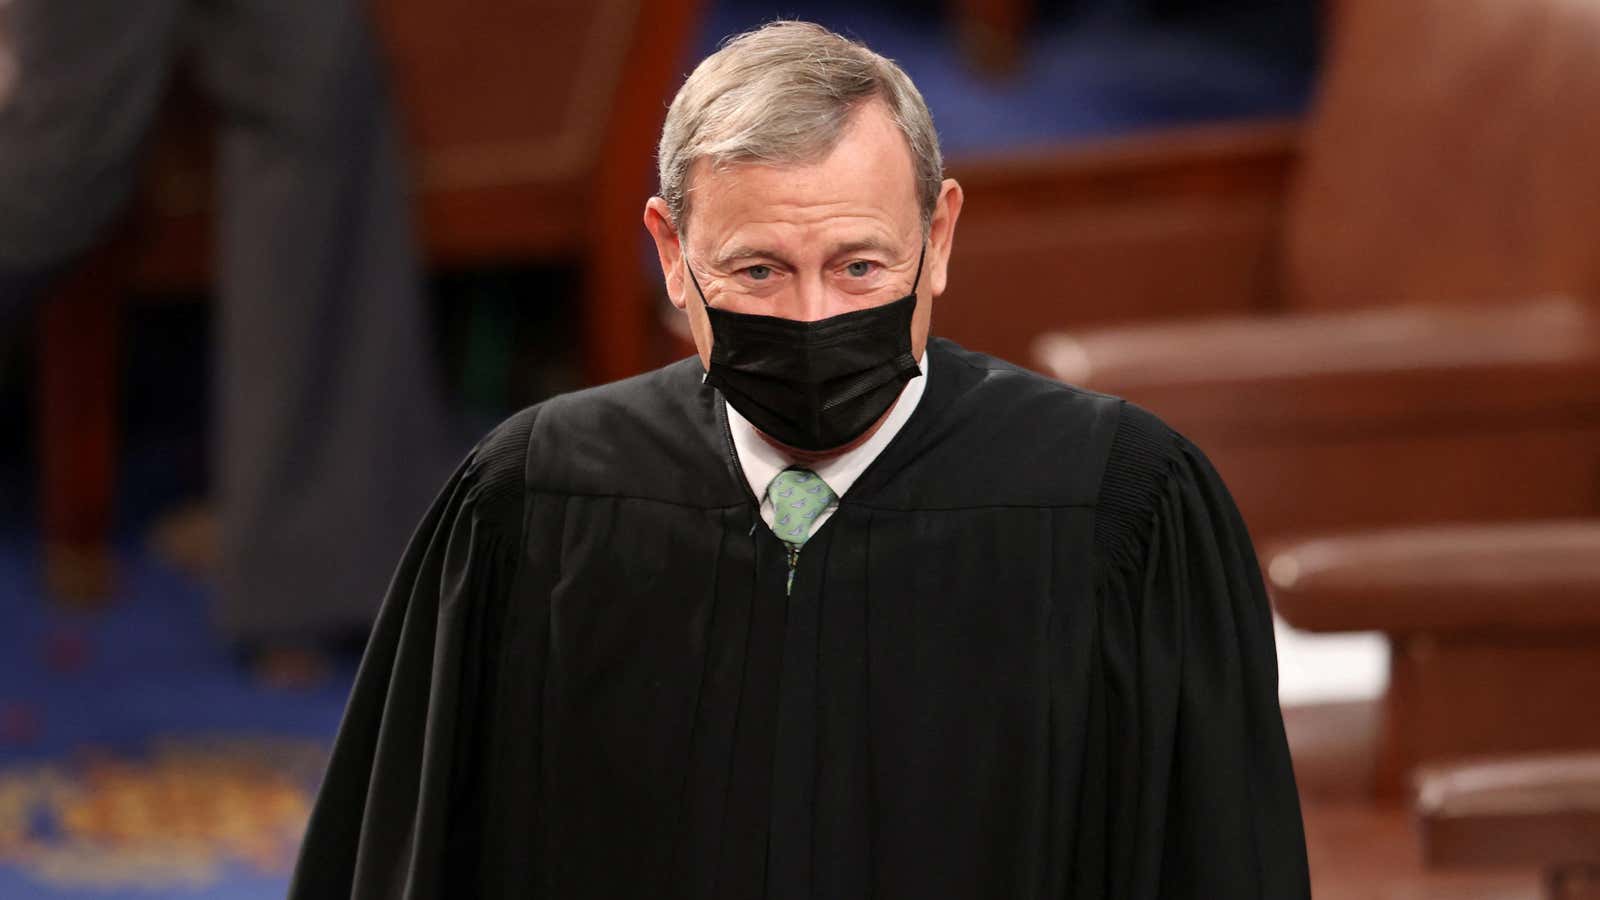 Chief Justice John Roberts reportedly asked everyone to mask up.